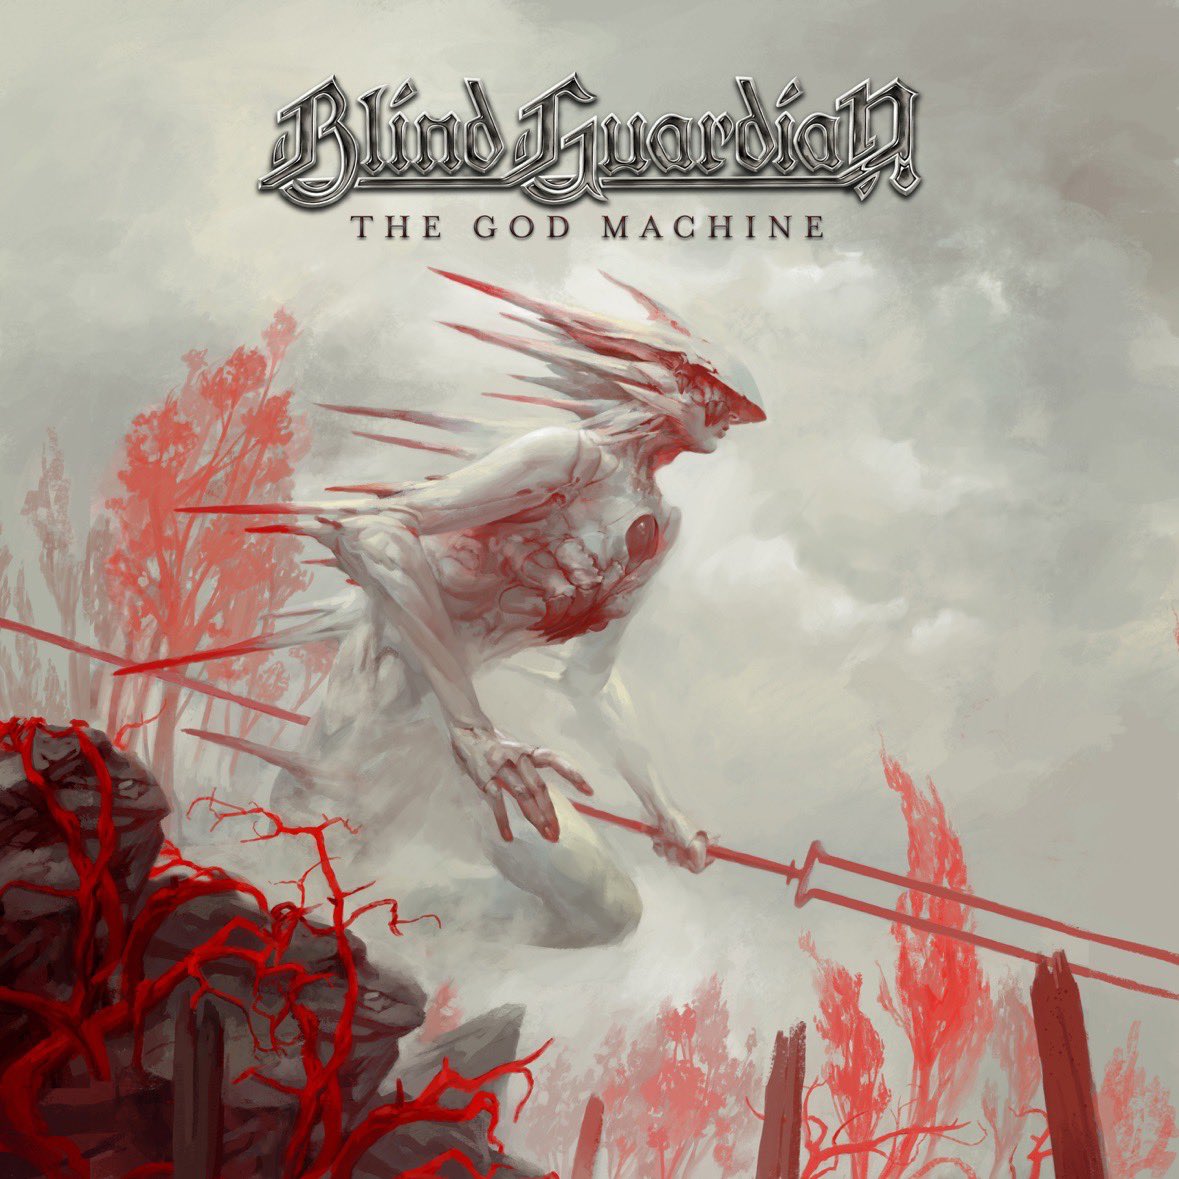 #Nowplaying Deliver Us From Evil - ブラインド・ガーディアン (The God Machine) ♪

Blind Guardian の2022年のアルバム。 https://t.co/TJj5aZCgqk